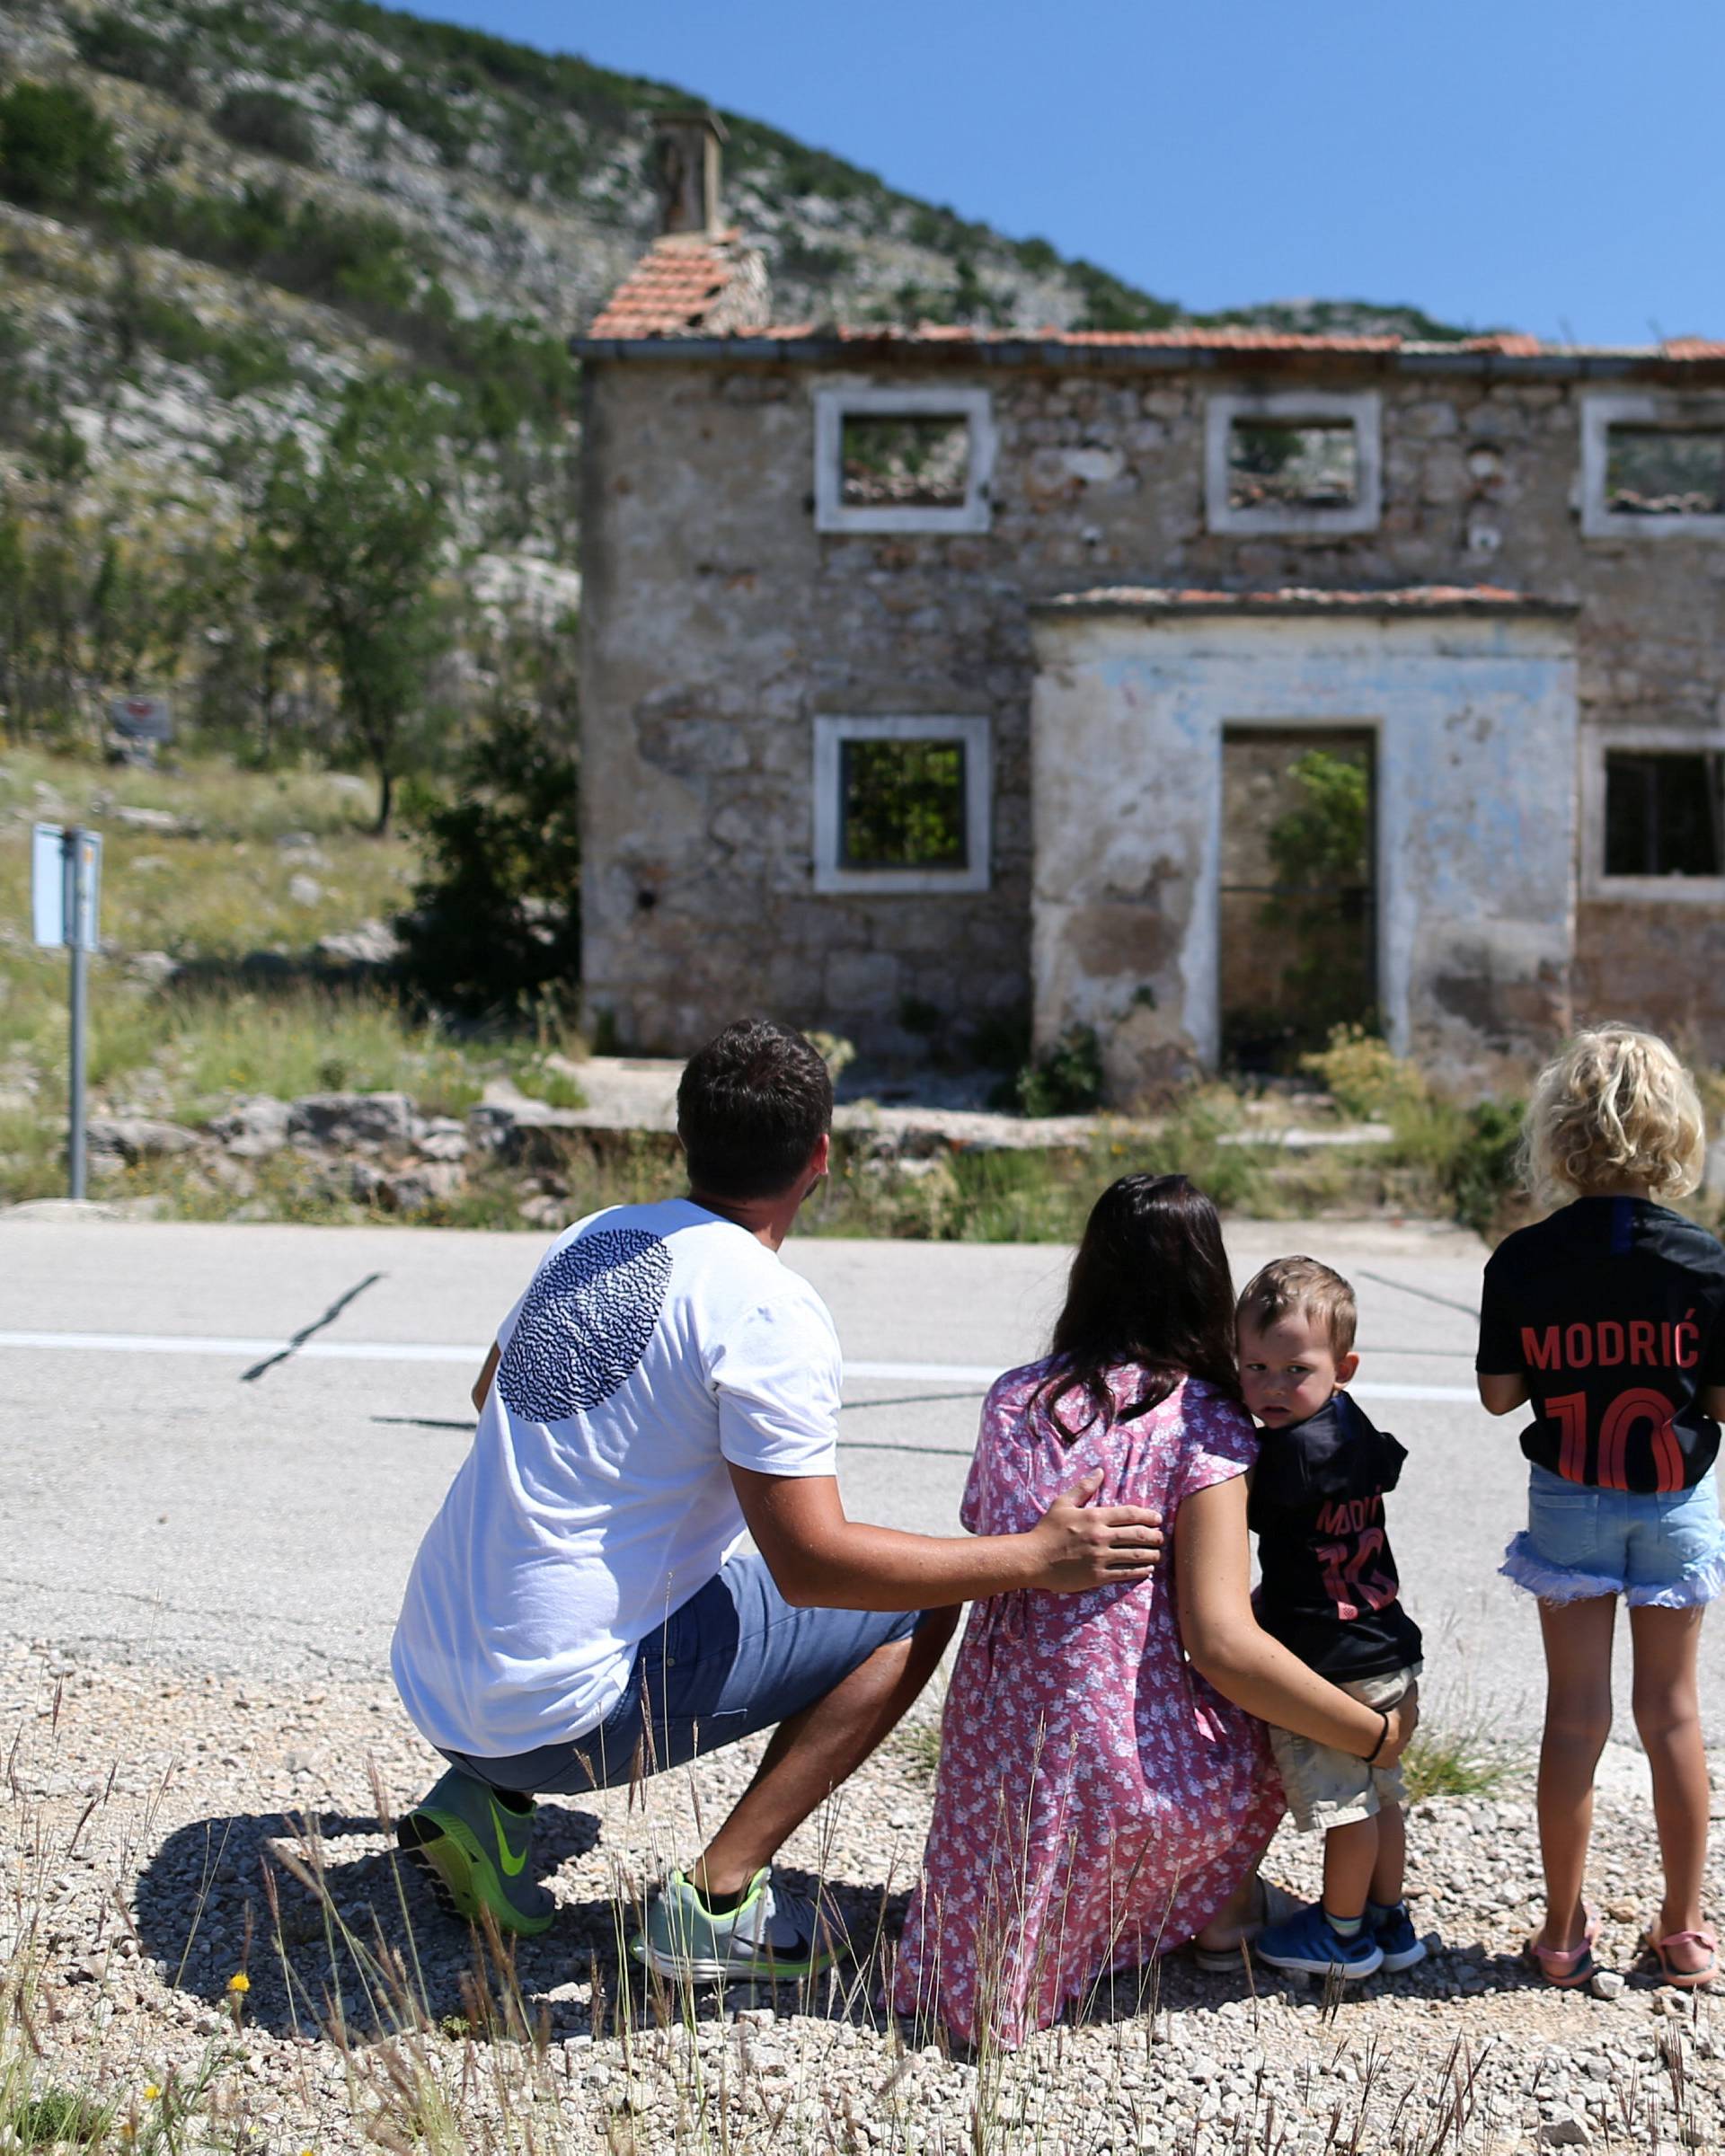 Family comes to see Luka Modric's birth house in Modrici village